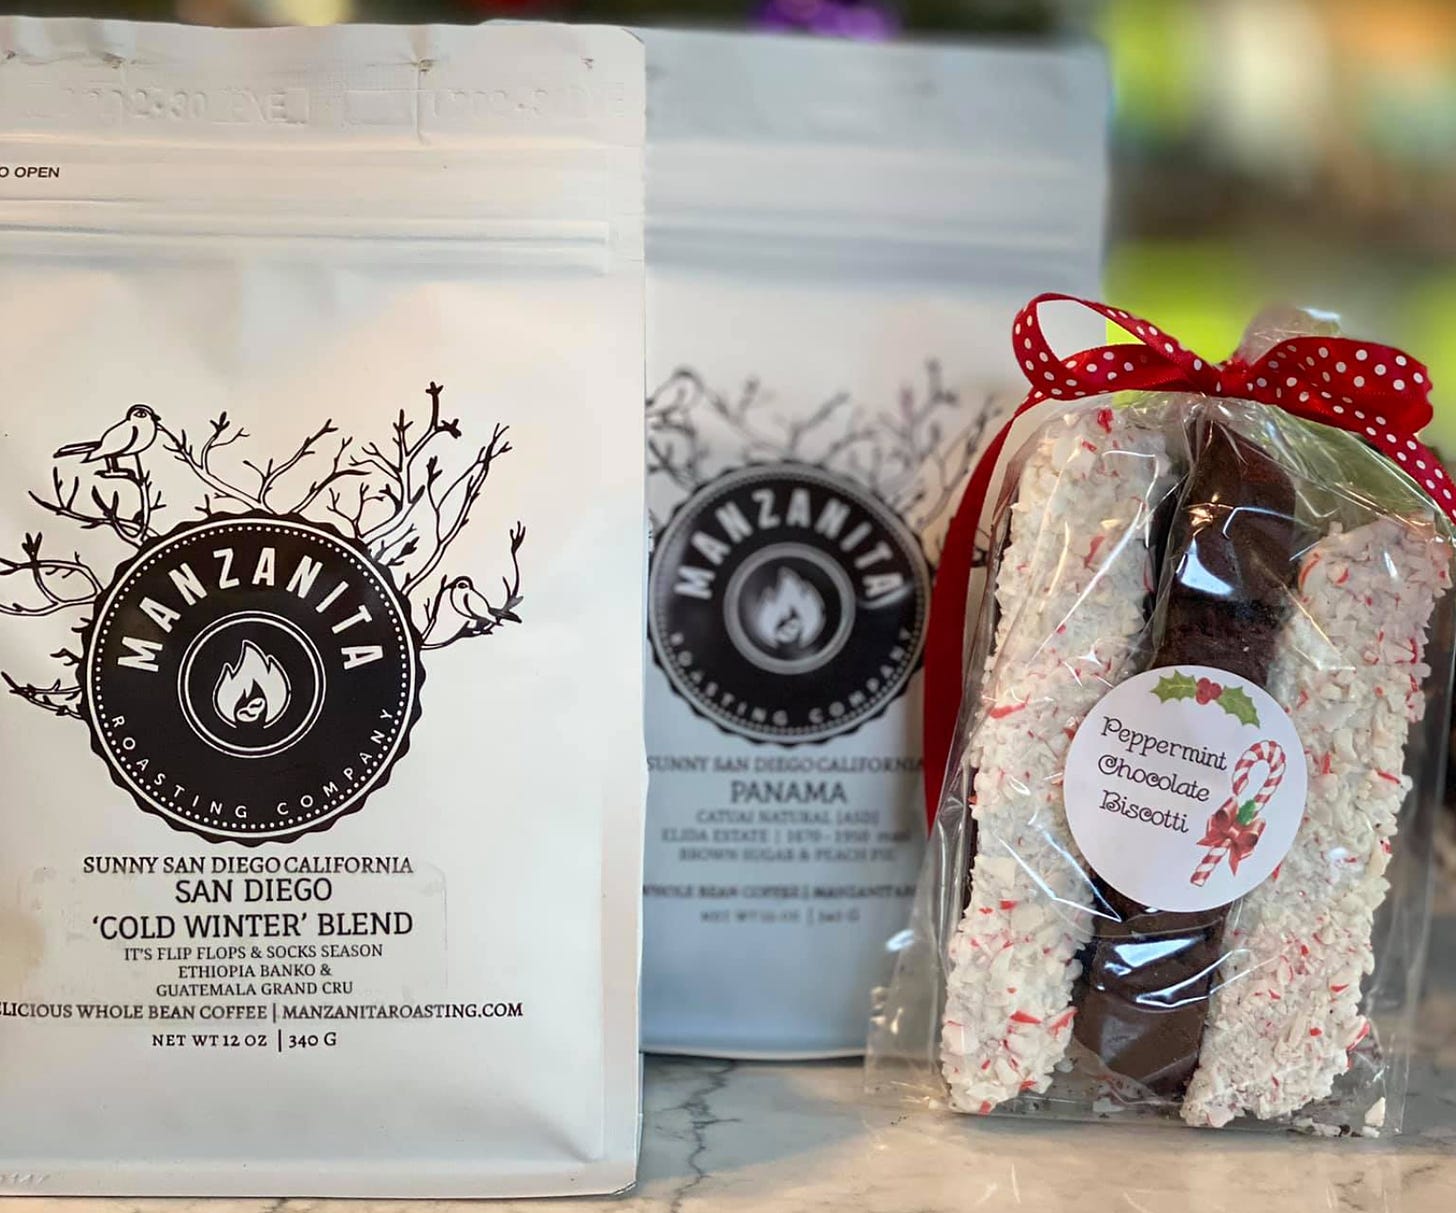 Two bags of Manzanita Roasting Coffee and a packaged Peppermint and Chocolate Biscotti holiday gift box offering.